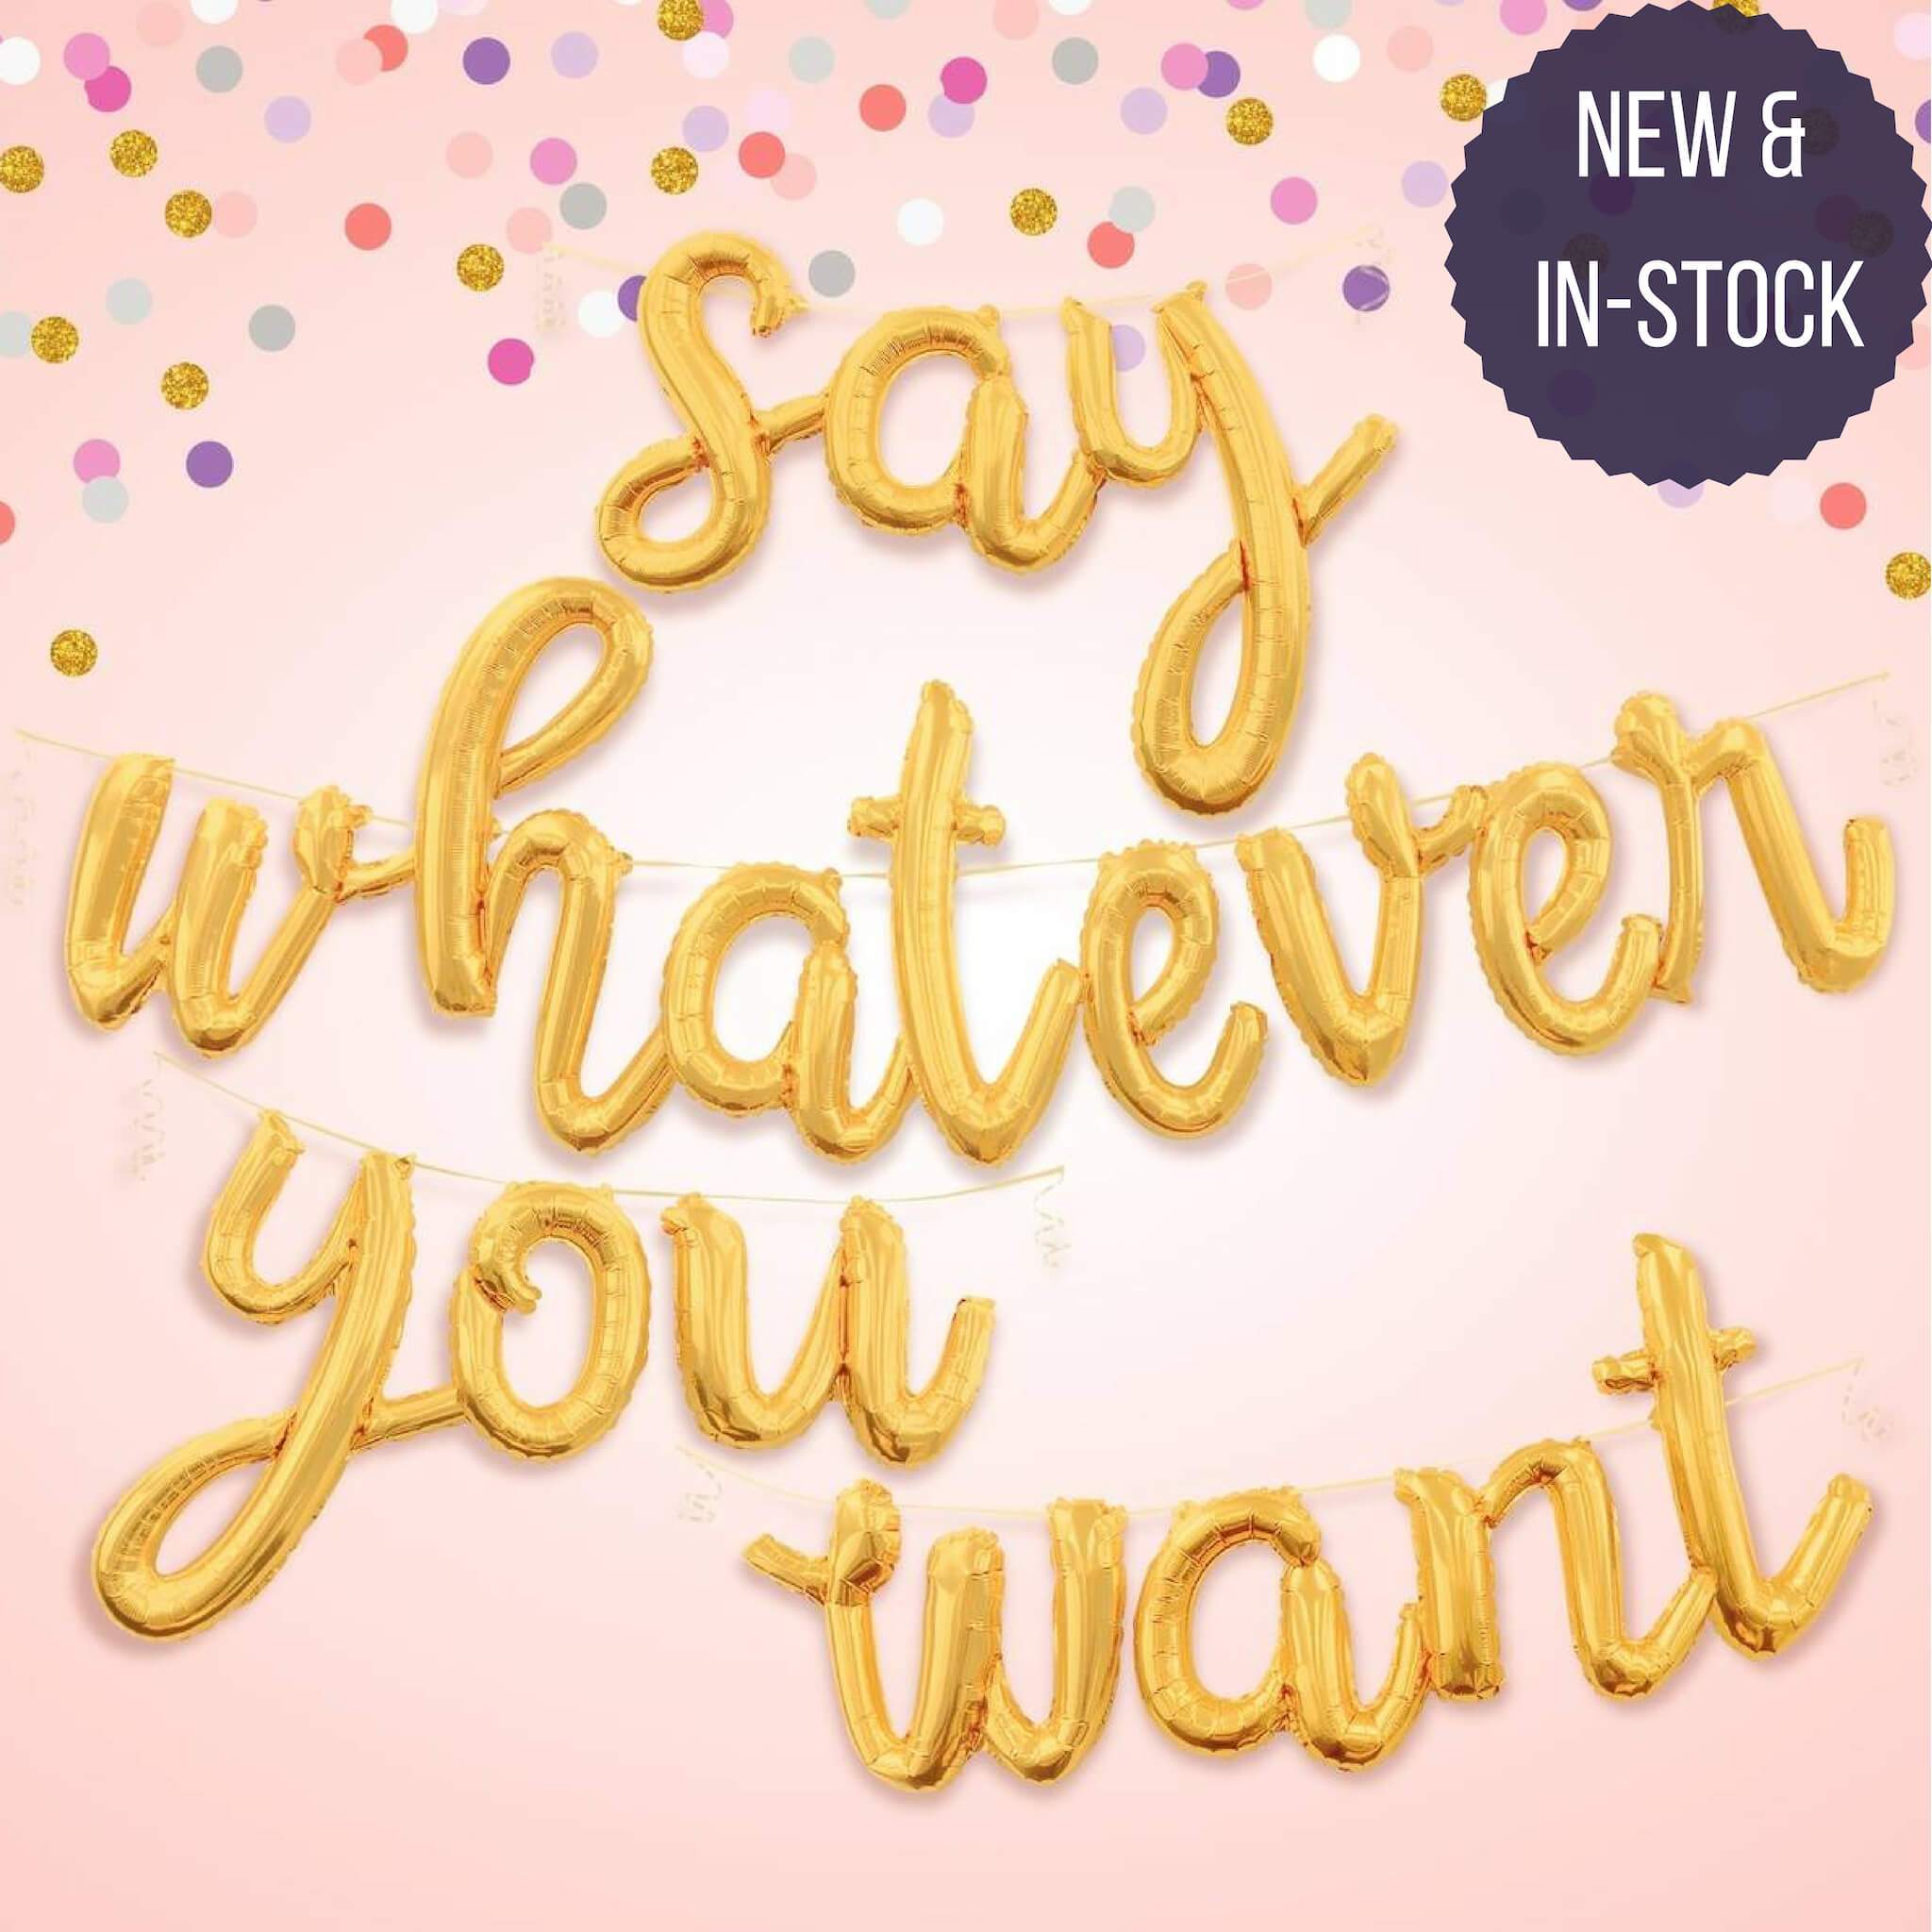 Script Balloon Letters - New Gold & Silver In-stock! - instaballoons –  instaballoons Wholesale